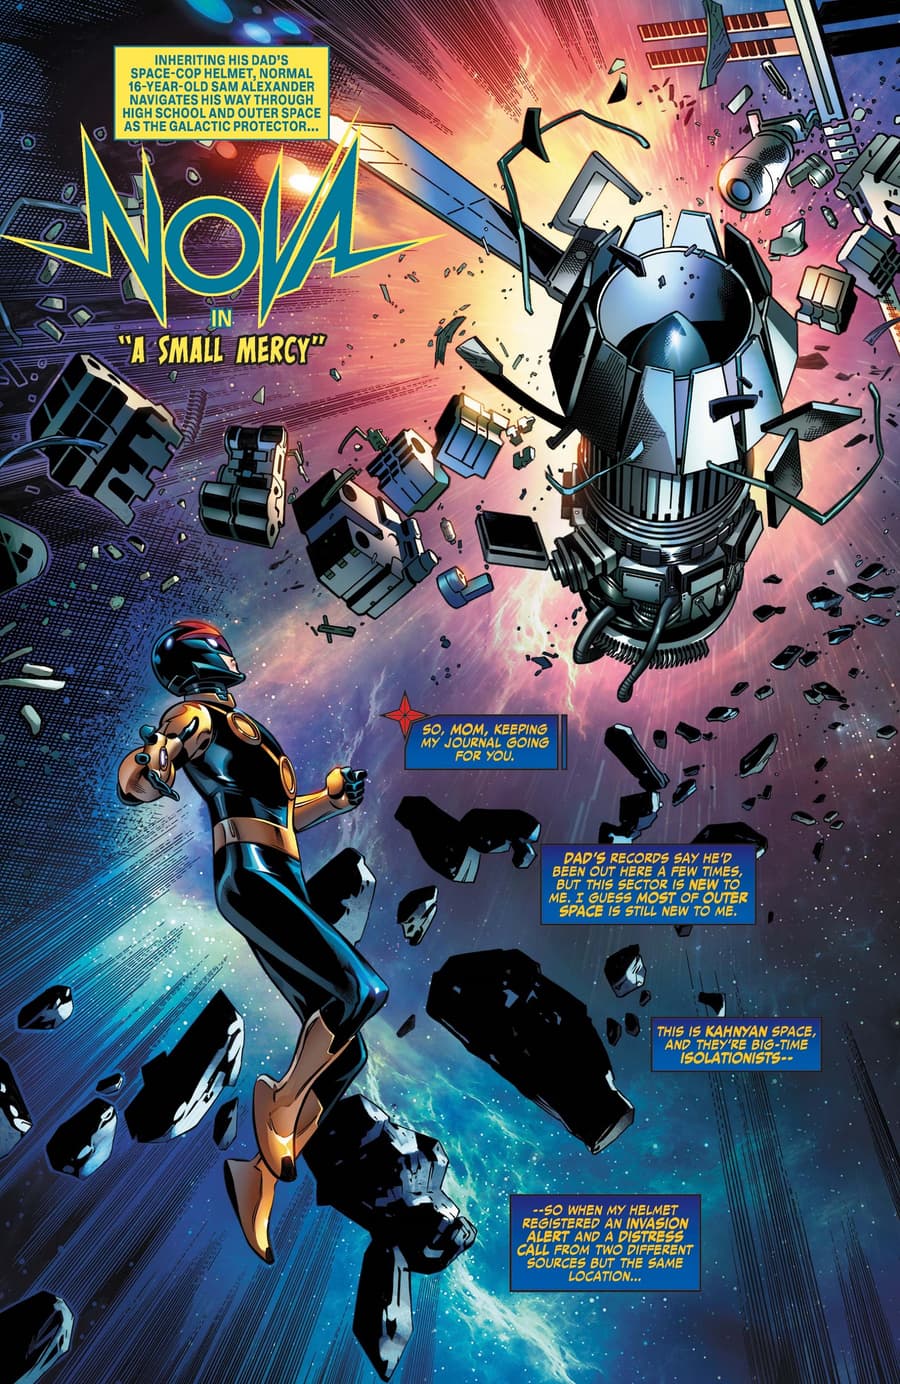 A preview of Nicieza’s Nova story from MARVEL'S VOICES: COMUNIDADES (2022) #1.